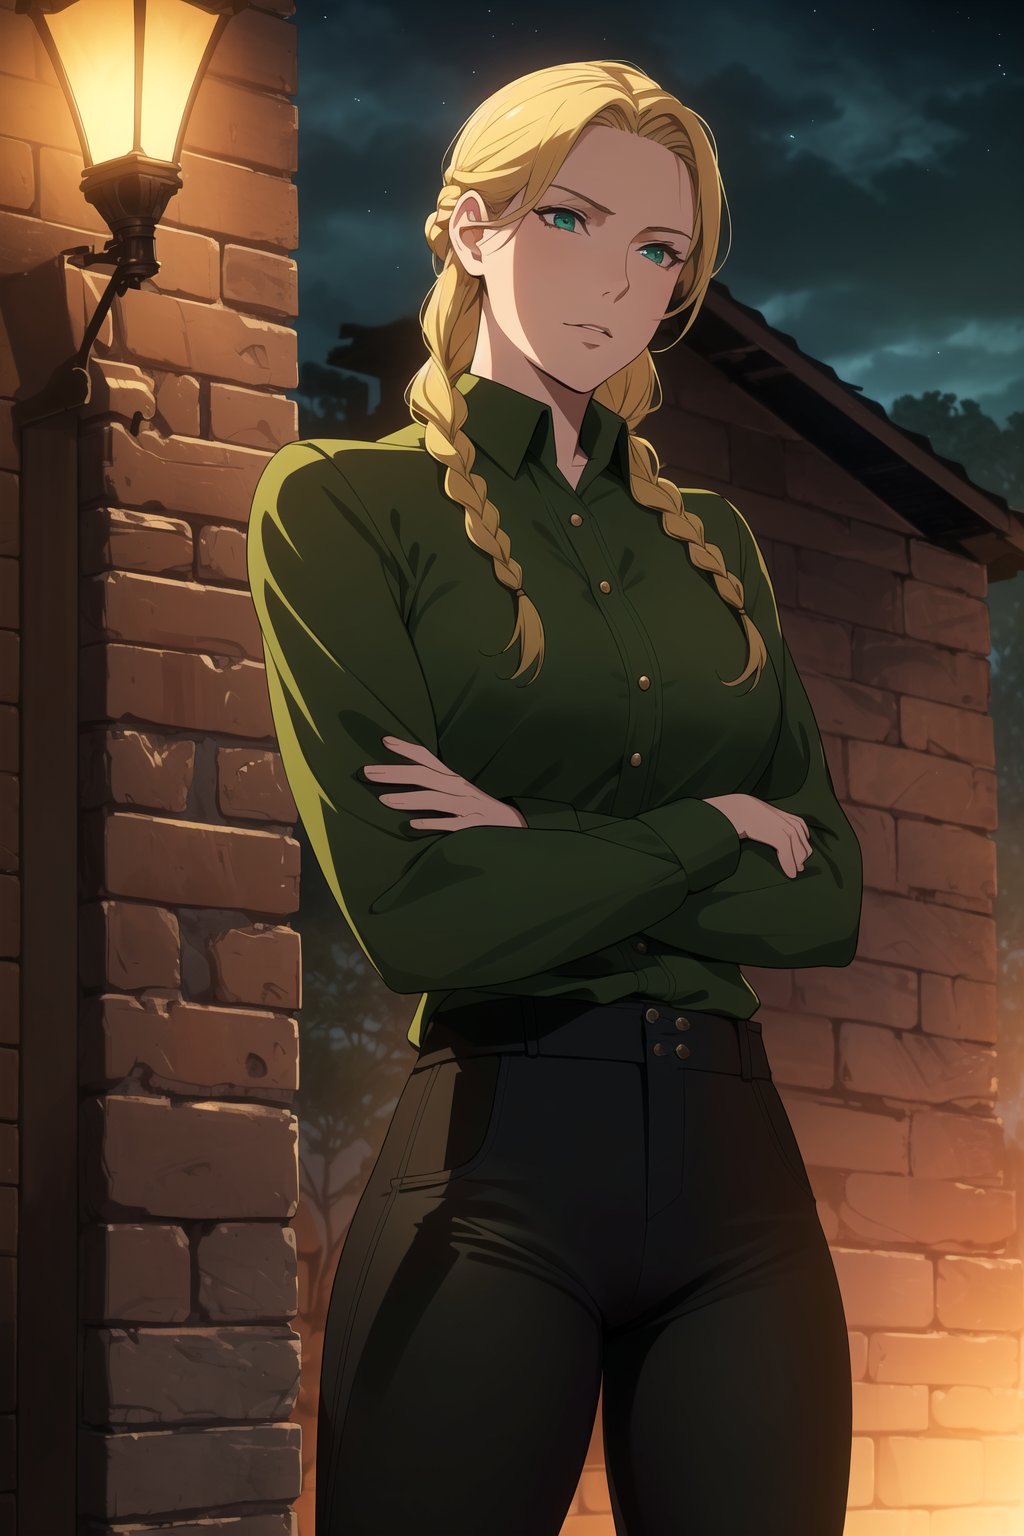 (Masterpiece, Best Quality), (A Resilient 25-Year-Old British Female Hunter), (Blonde Hair in a Singular Braid:1.4), (Observant Green Eyes), (Fair Skin), (Wearing Loose-buttoned Dark Green Shirt and Black Tight Pants:1.4), (Outback Wilderness at Night:1.2), (Crossed Arms Pose:1.4), Centered, (Half Body Shot:1.4), (From Front Shot:1.2), Insane Details, Intricate Face Detail, Intricate Hand Details, Cinematic Shot and Lighting, Realistic and Vibrant Colors, Sharp Focus, Ultra Detailed, Realistic Images, Depth of Field, Incredibly Realistic Environment and Scene, Master Composition and Cinematography, castlevania style,castlevania style